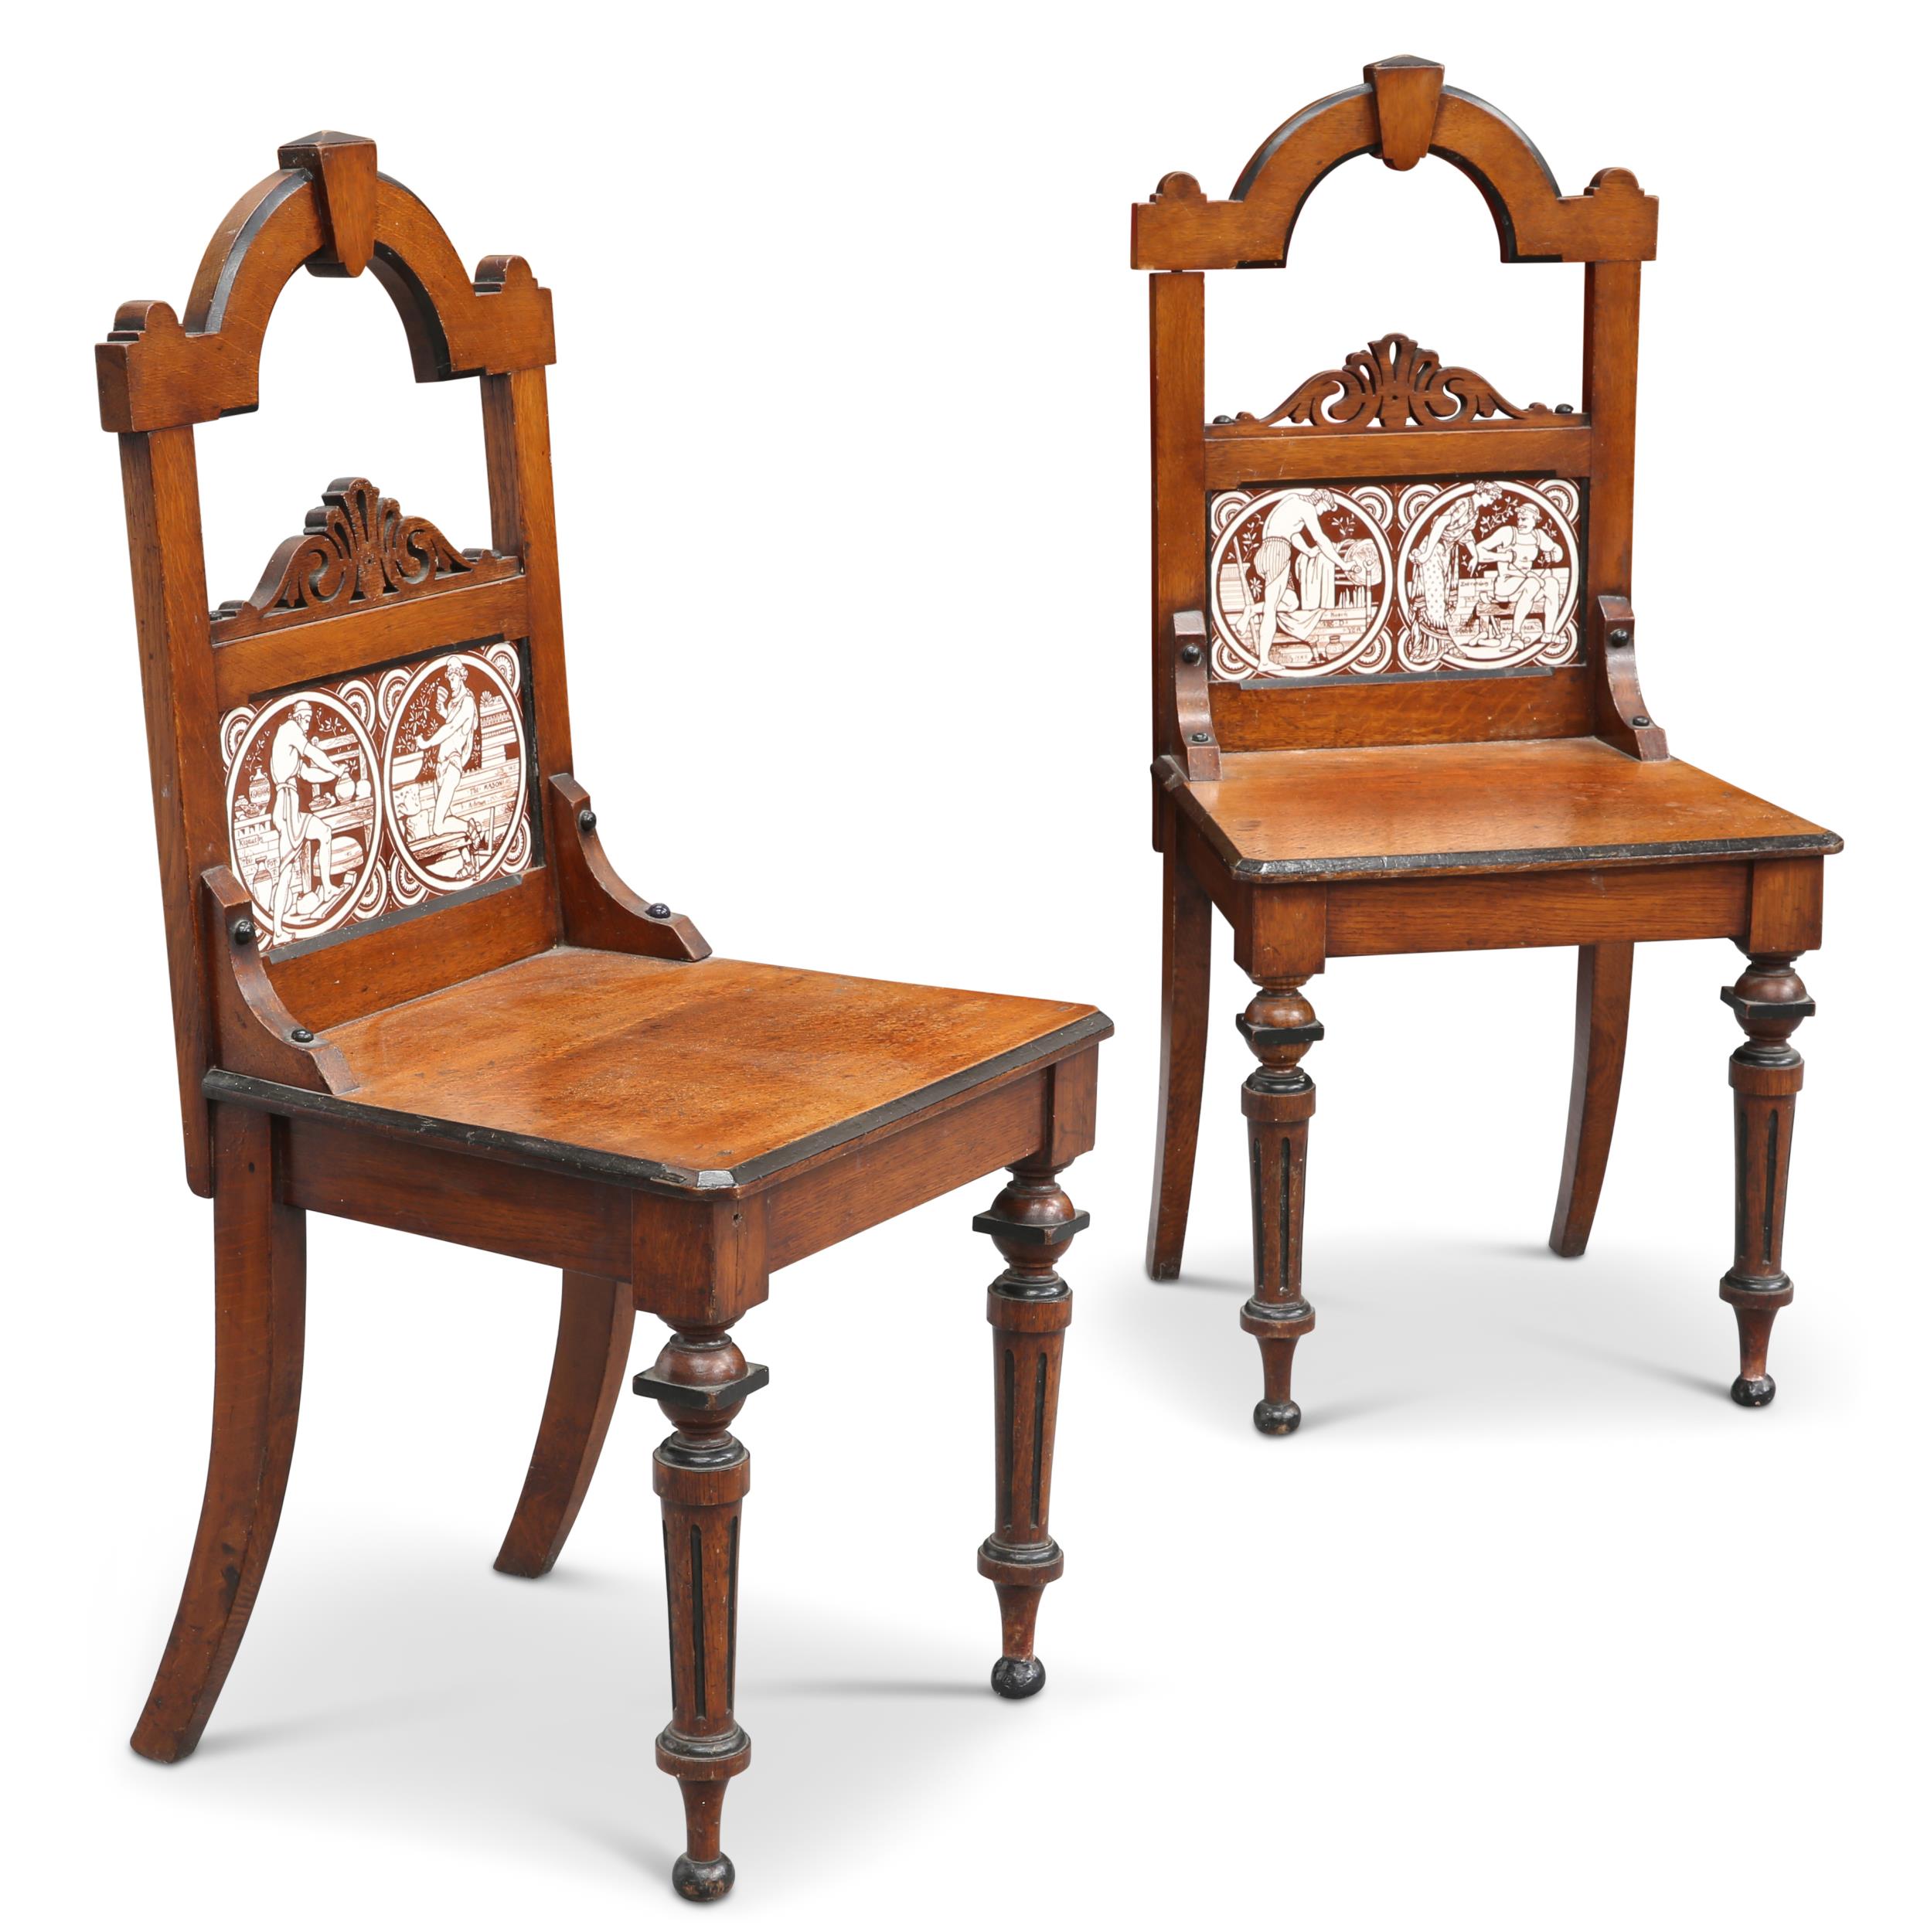 A PAIR OF VICTORIAN OAK HALL CHAIRS WITH MINTON TILES